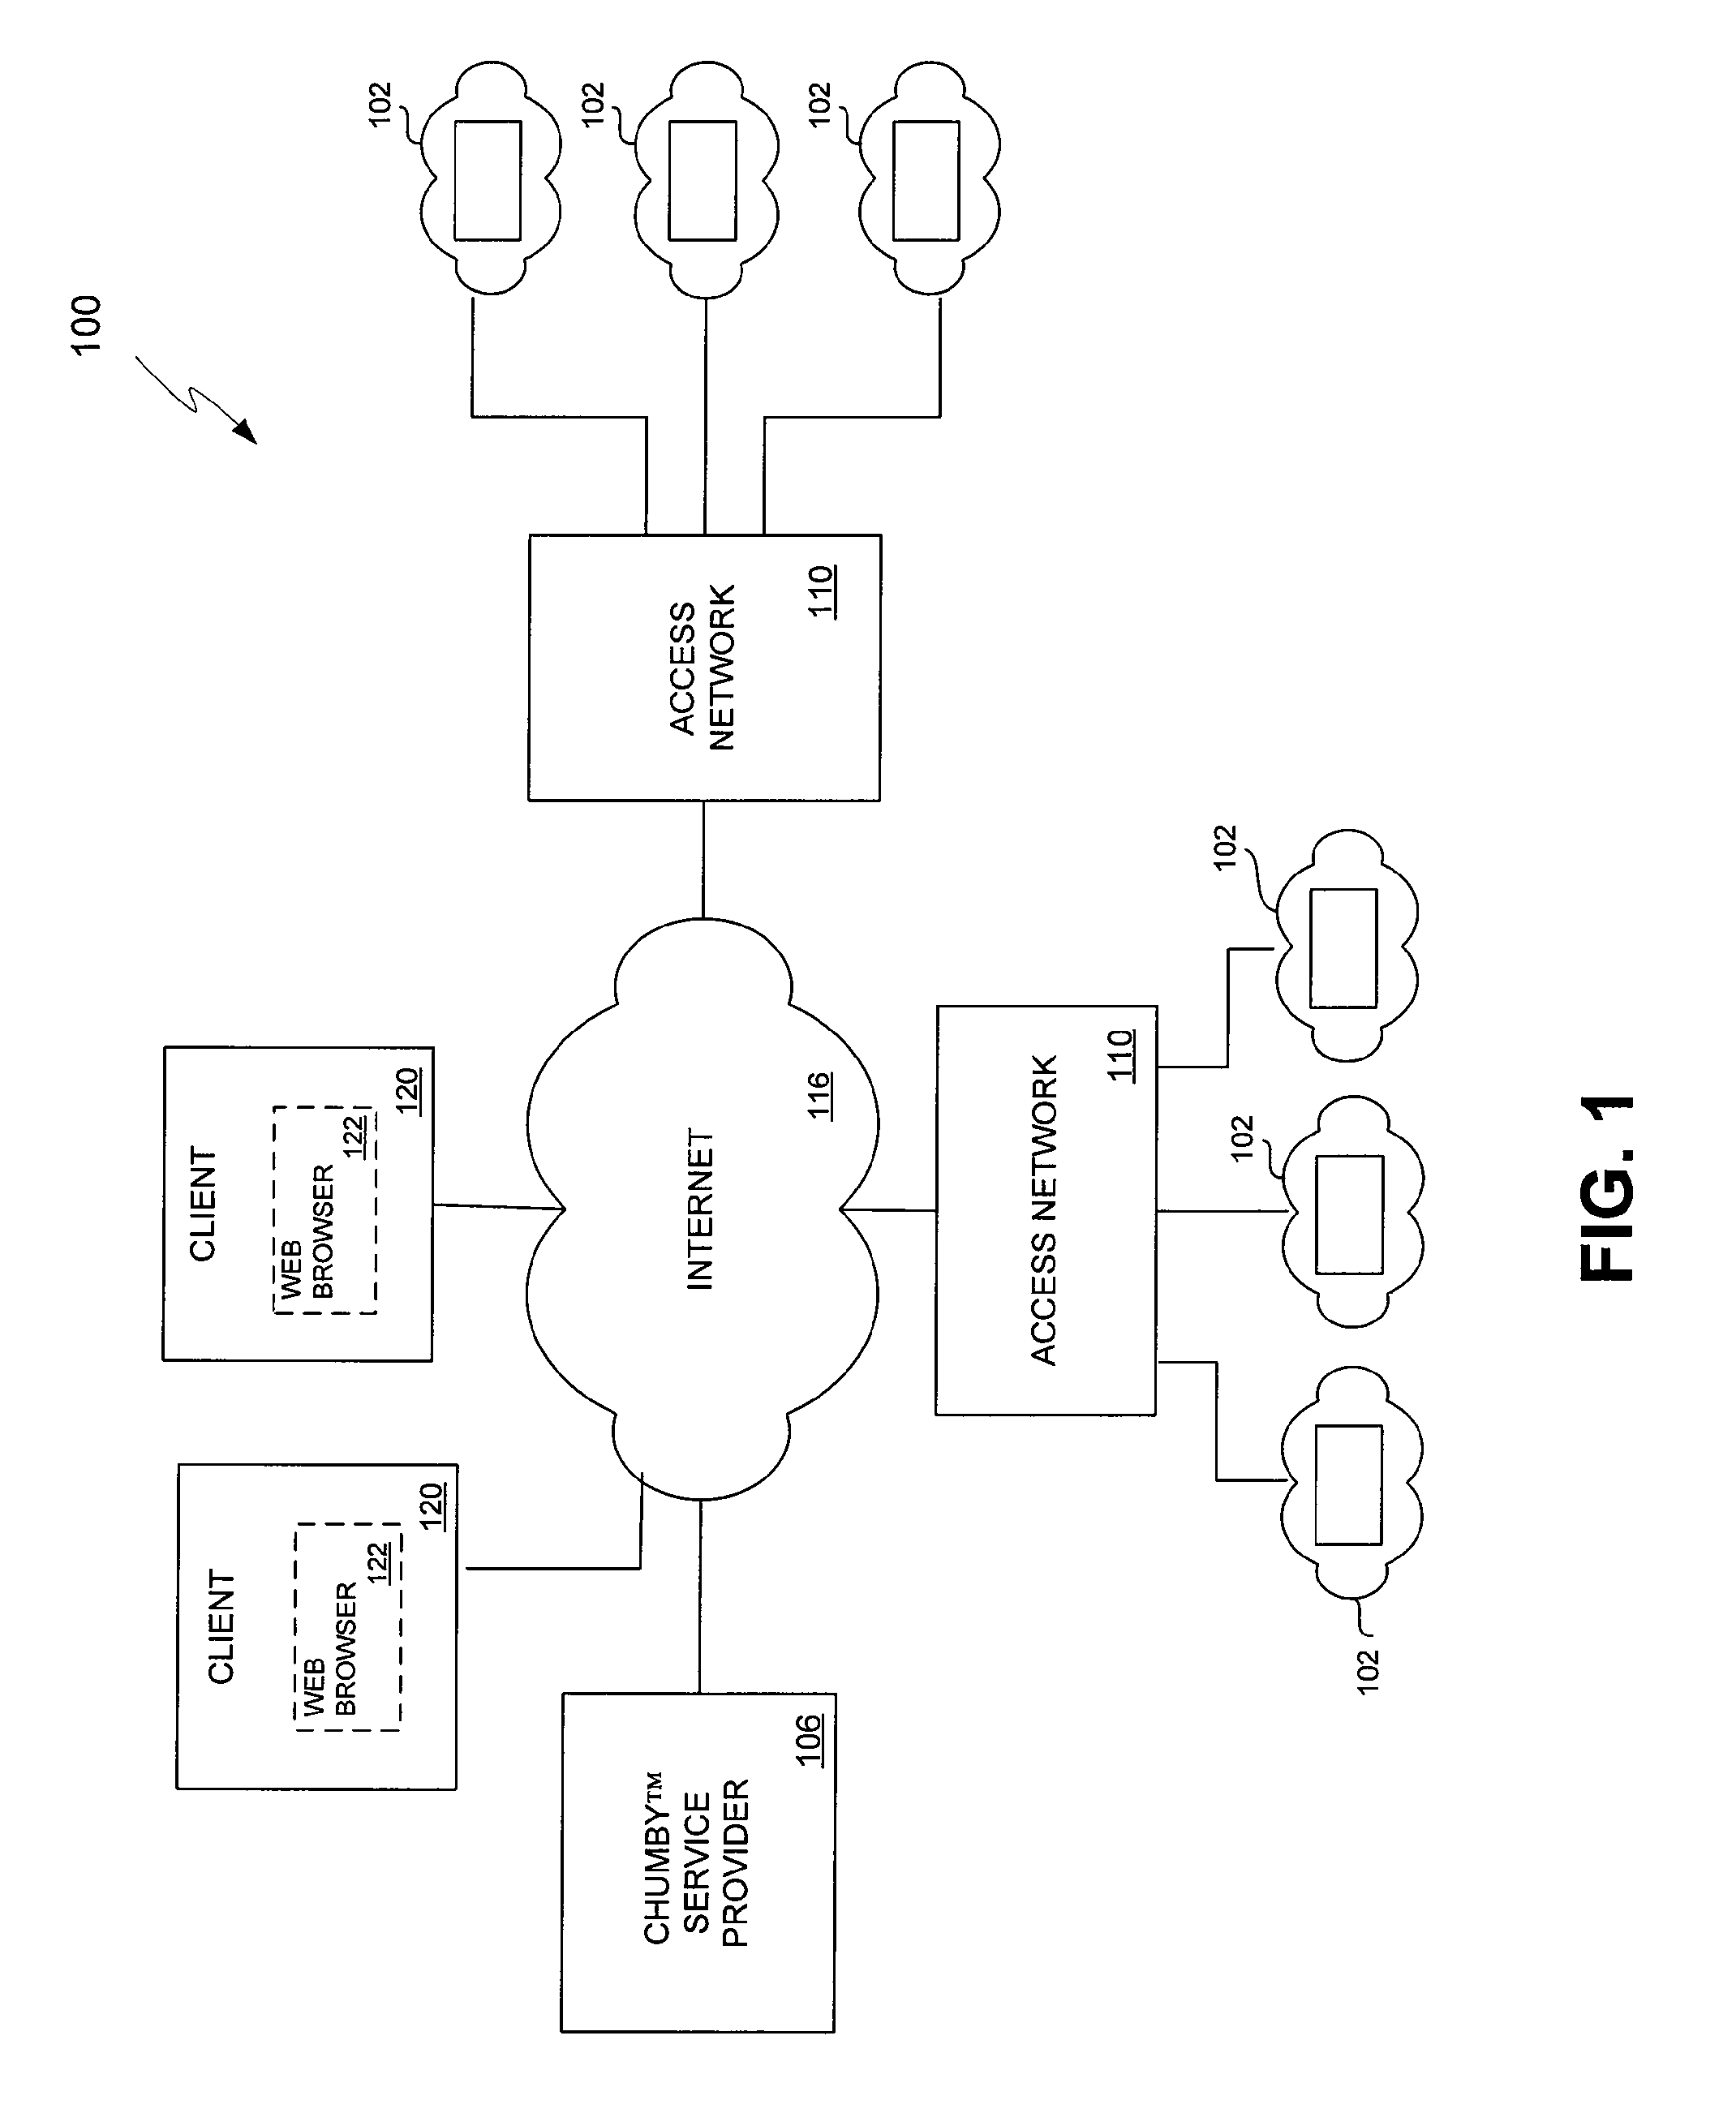 System and method for automatically updating the software of a networked personal audiovisual device